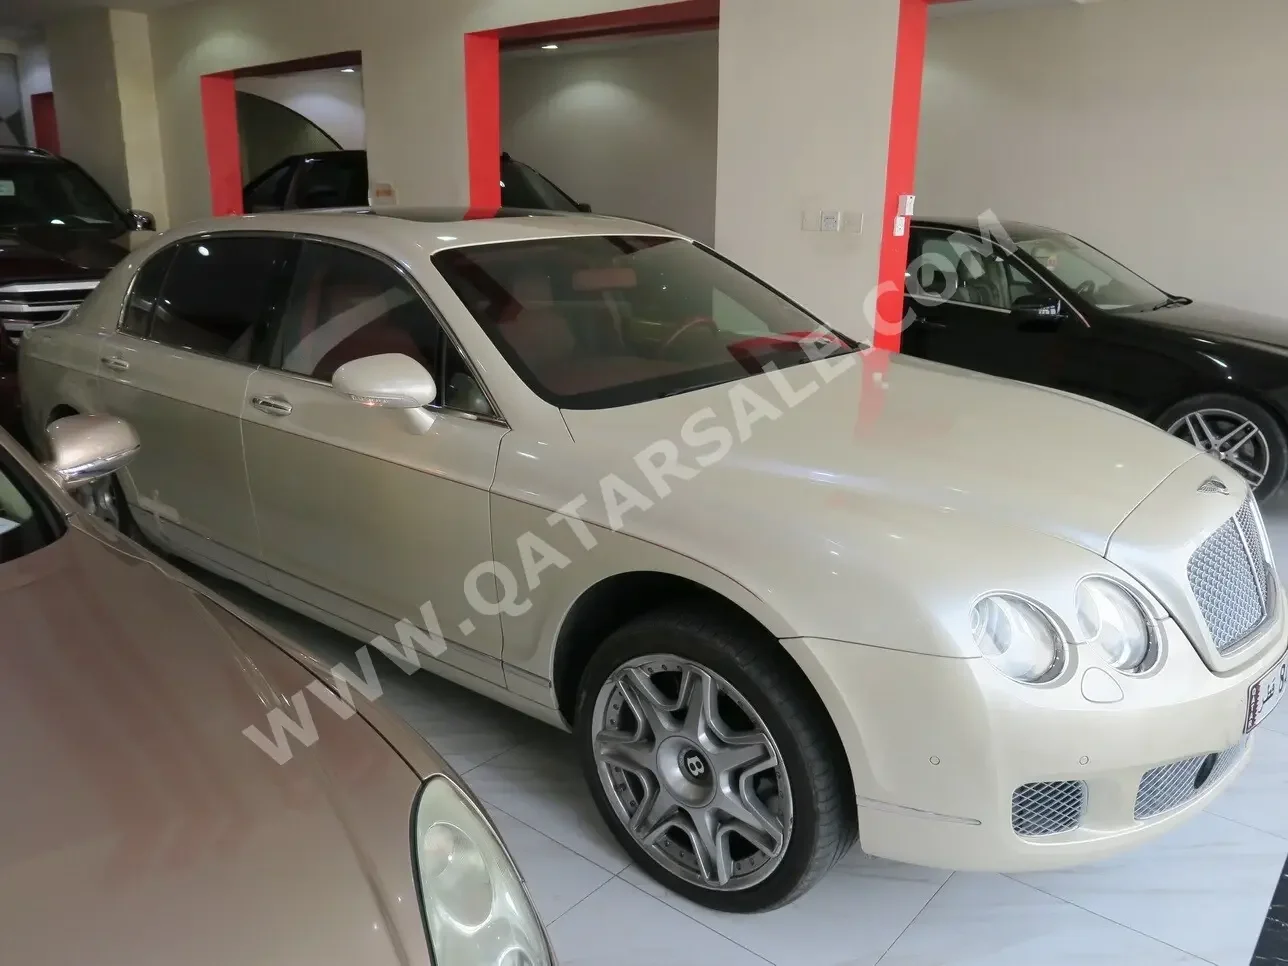 Bentley  Continental  Flying Spur  2009  Automatic  62,000 Km  12 Cylinder  All Wheel Drive (AWD)  Sedan  Beige